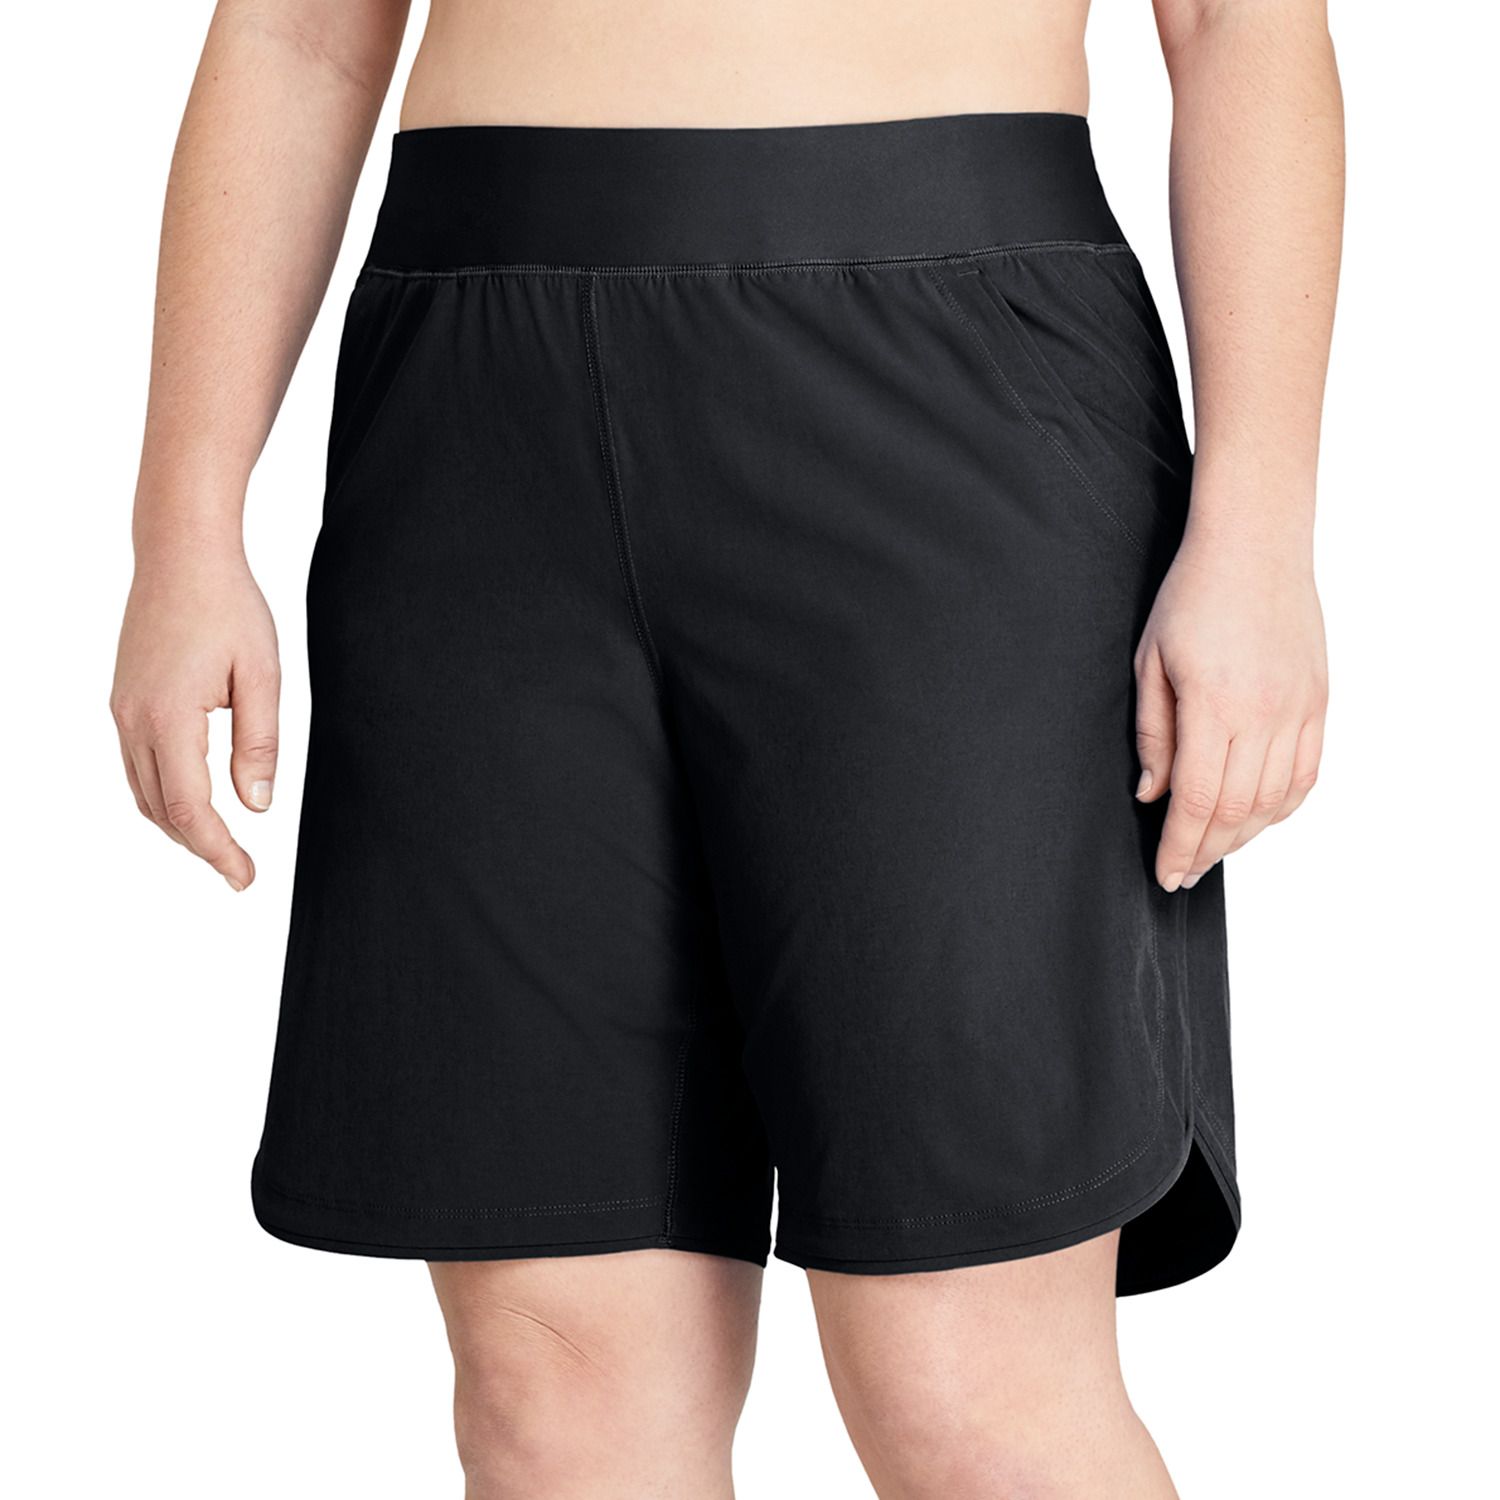 Image for Lands' End Women's Quick Dry Thigh-Minimizer Modest Swim Shorts at Kohl's.